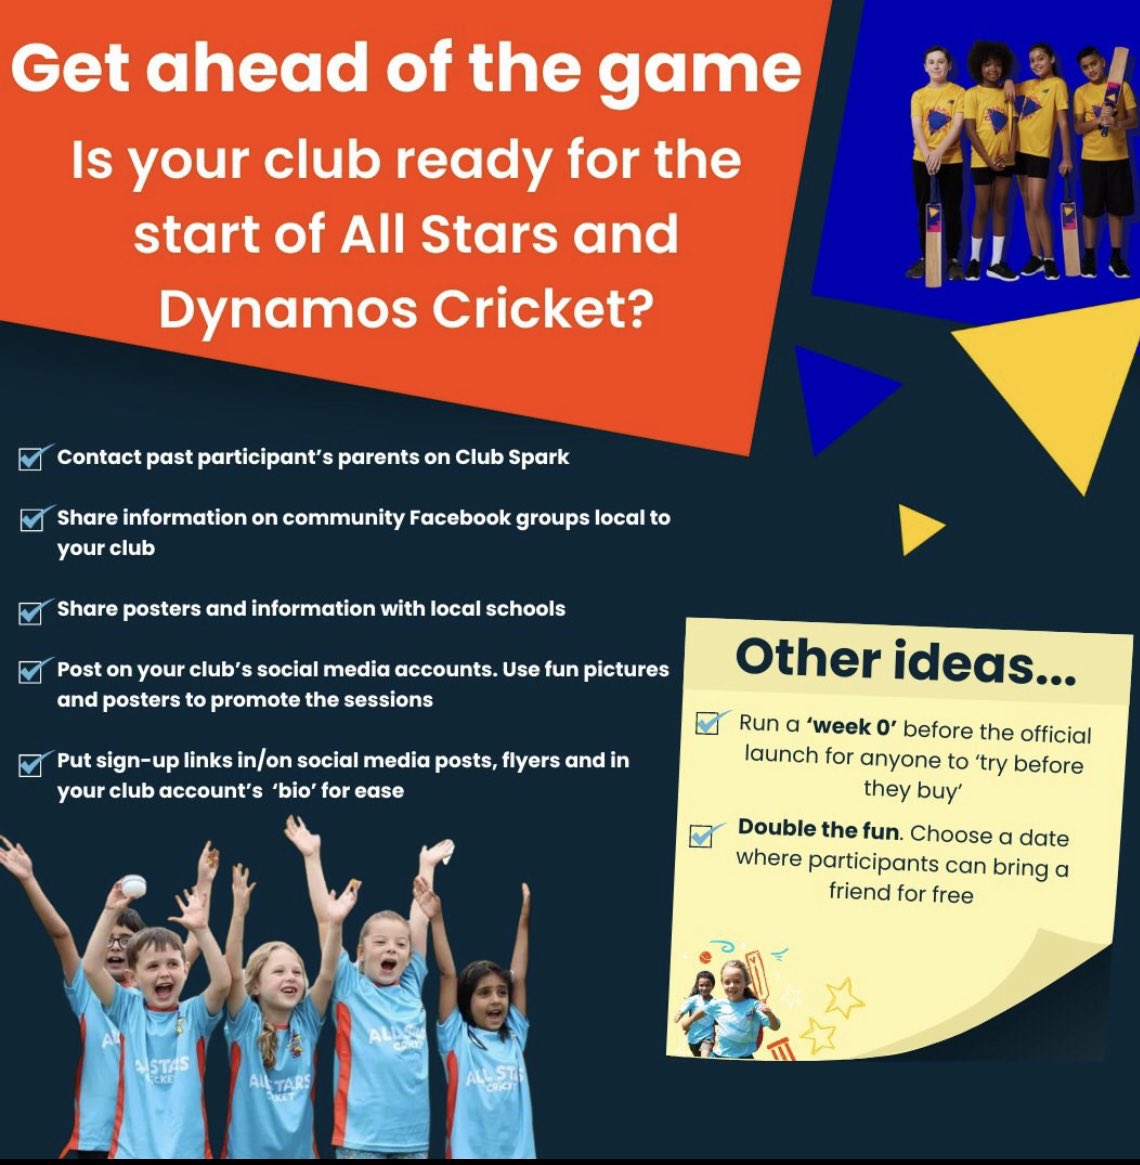 Want to attract more All Stars and Dynamos participants to your club?Check out the pic below ⬇️. Let the Summer of Fun Begin ☄️🏏☀️🤩@allstarscricket @DynamosCricket @CoachWrexham